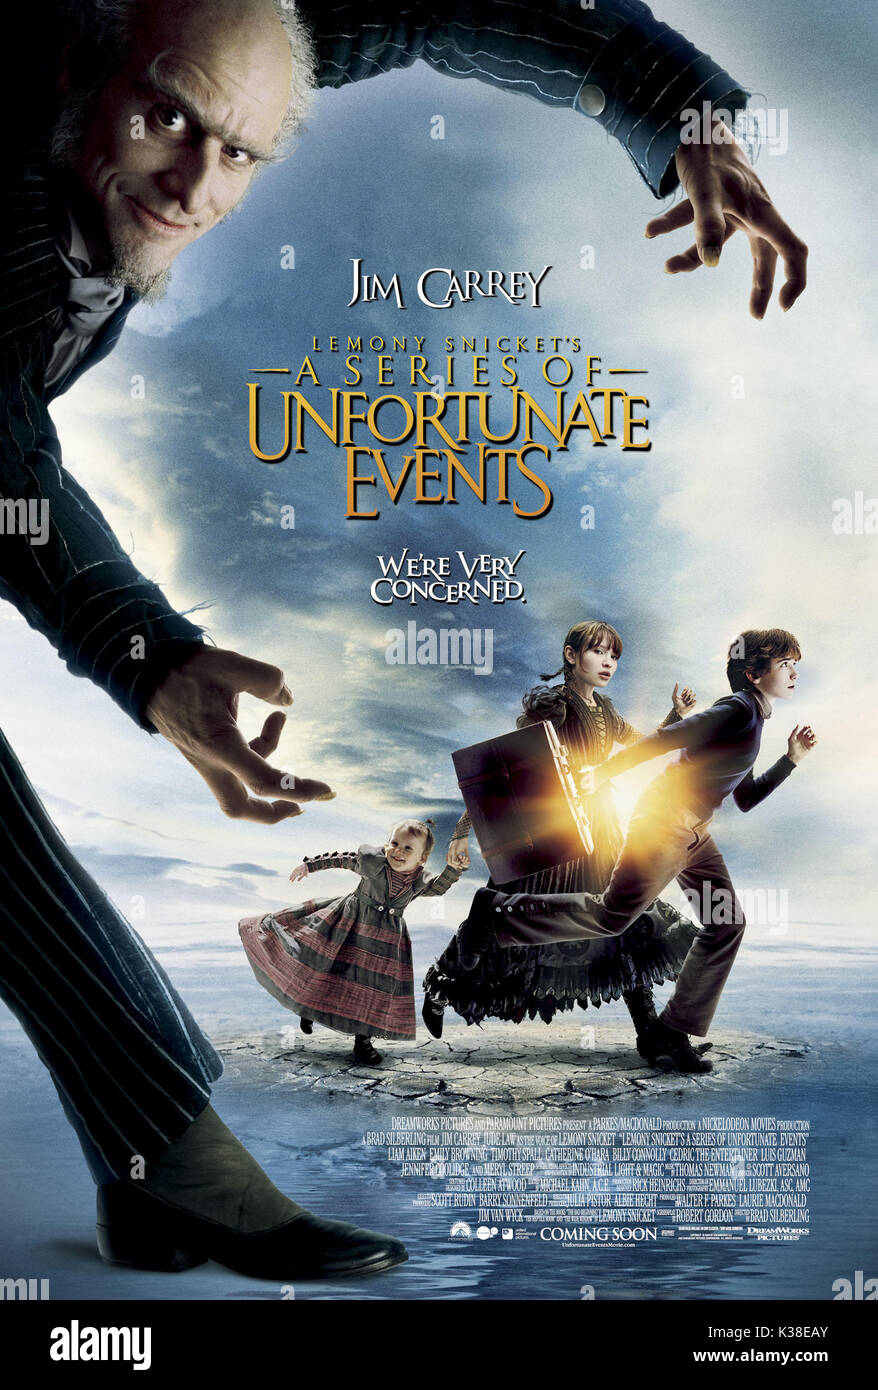 LEMONYS NICKET'S A SERIES OF UNFORTUNATE INCIDENTS (US 2004) POSTER     Date: 2004 Stock Photo